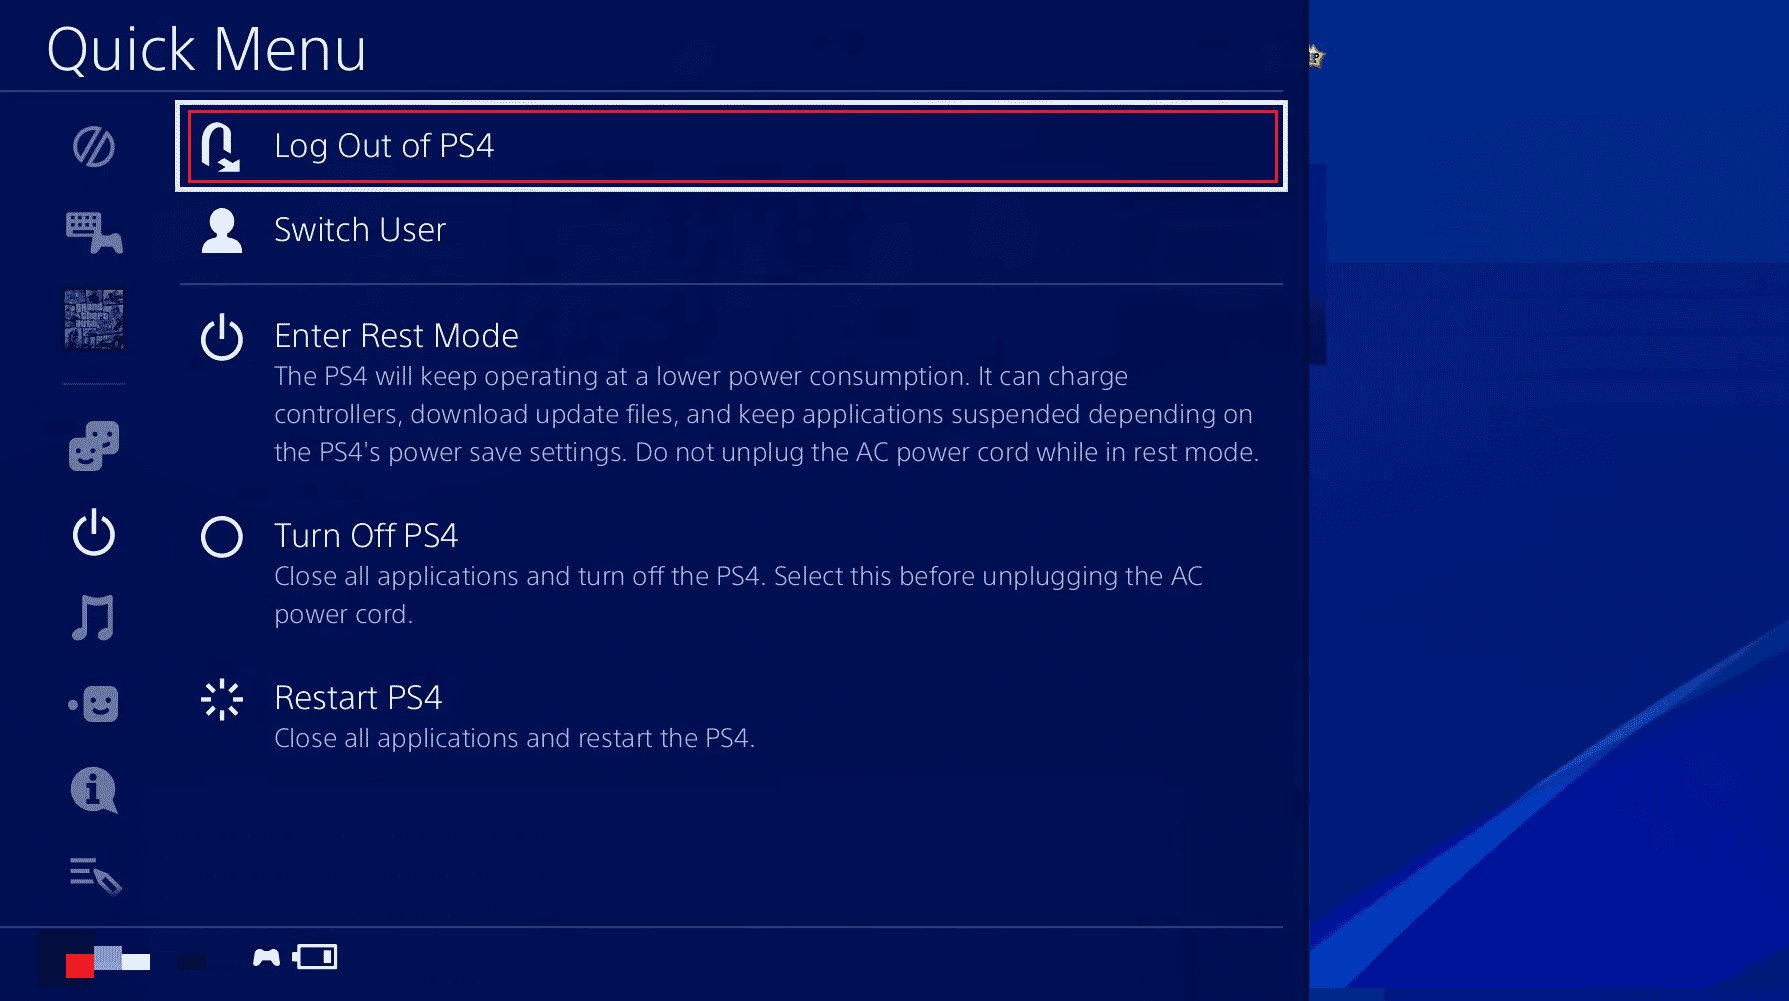 choose the Log Out of PS4 option